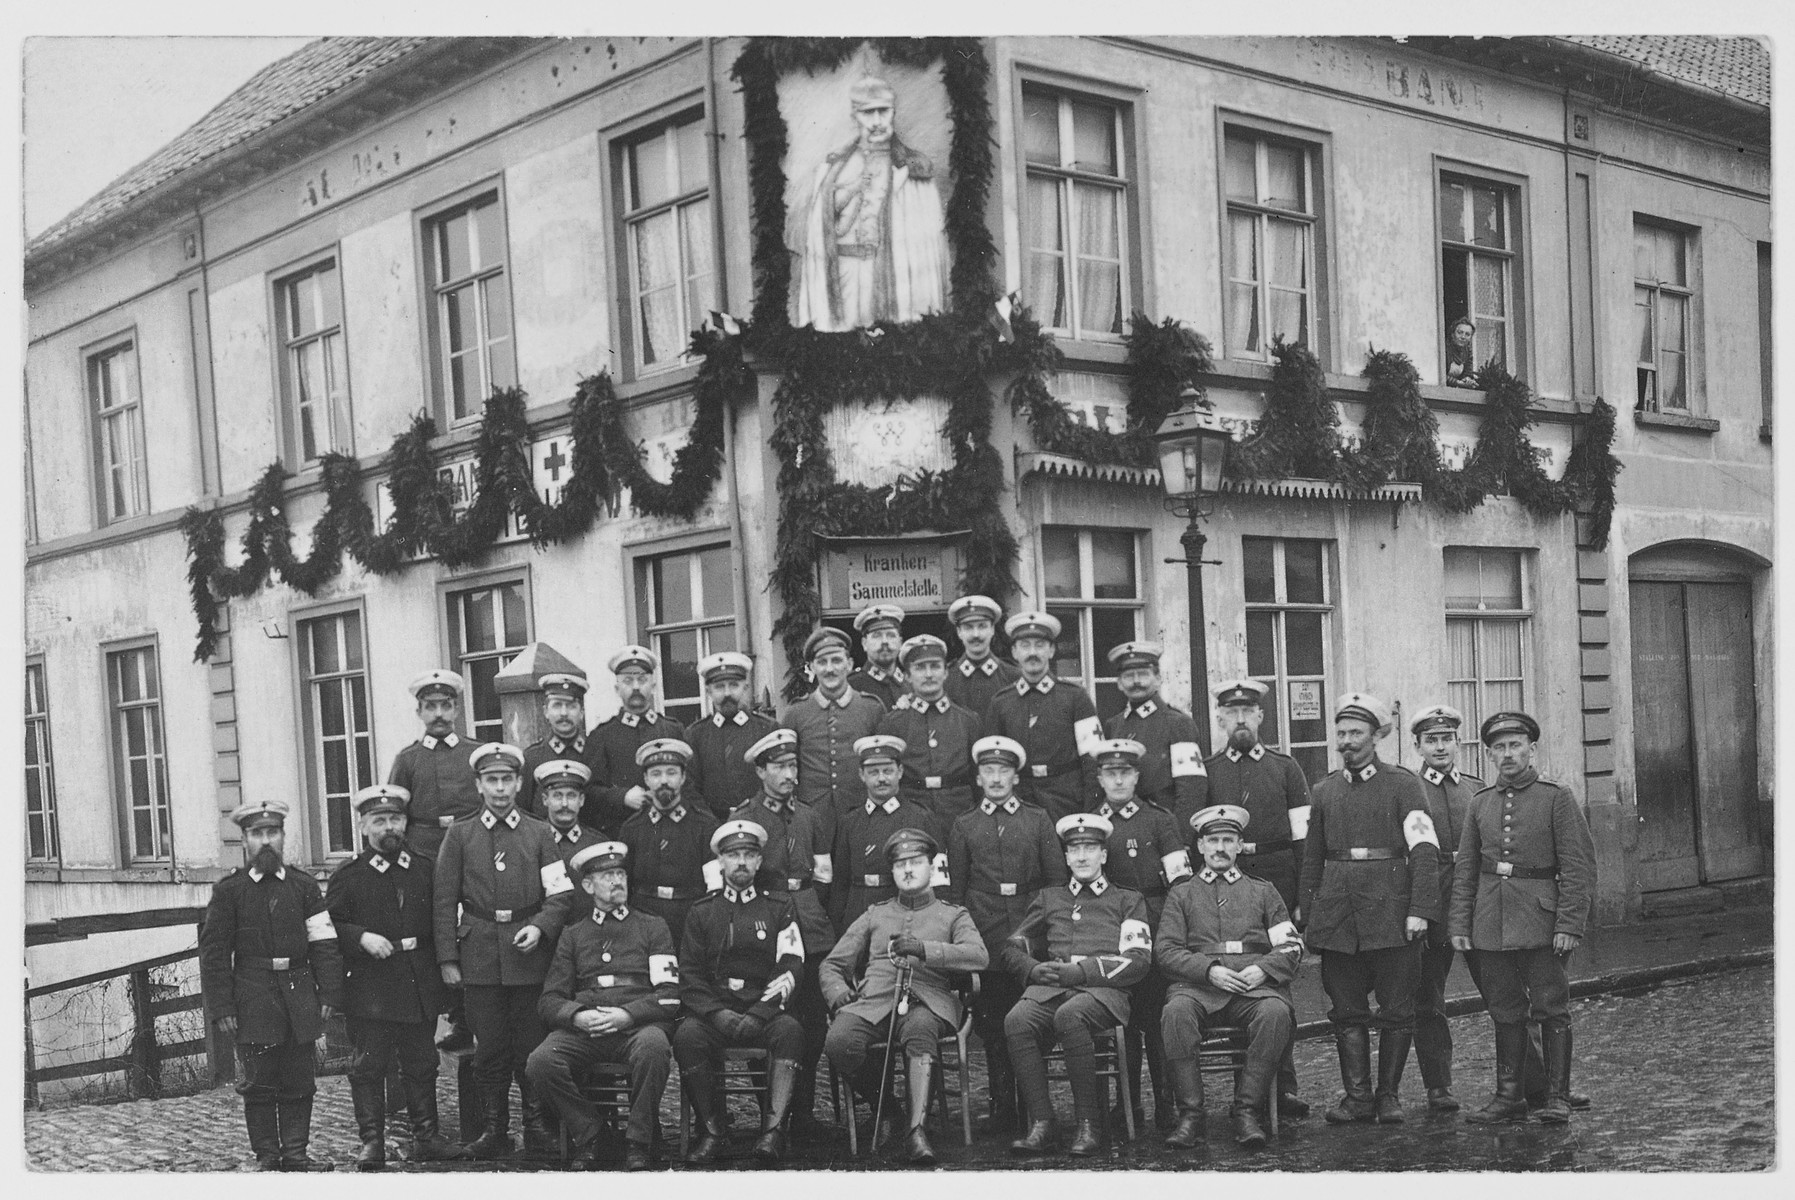 Group portrait of doctors who have been mobilized for the war effort, beneath a portrait of the Kaiser outside a hospital.